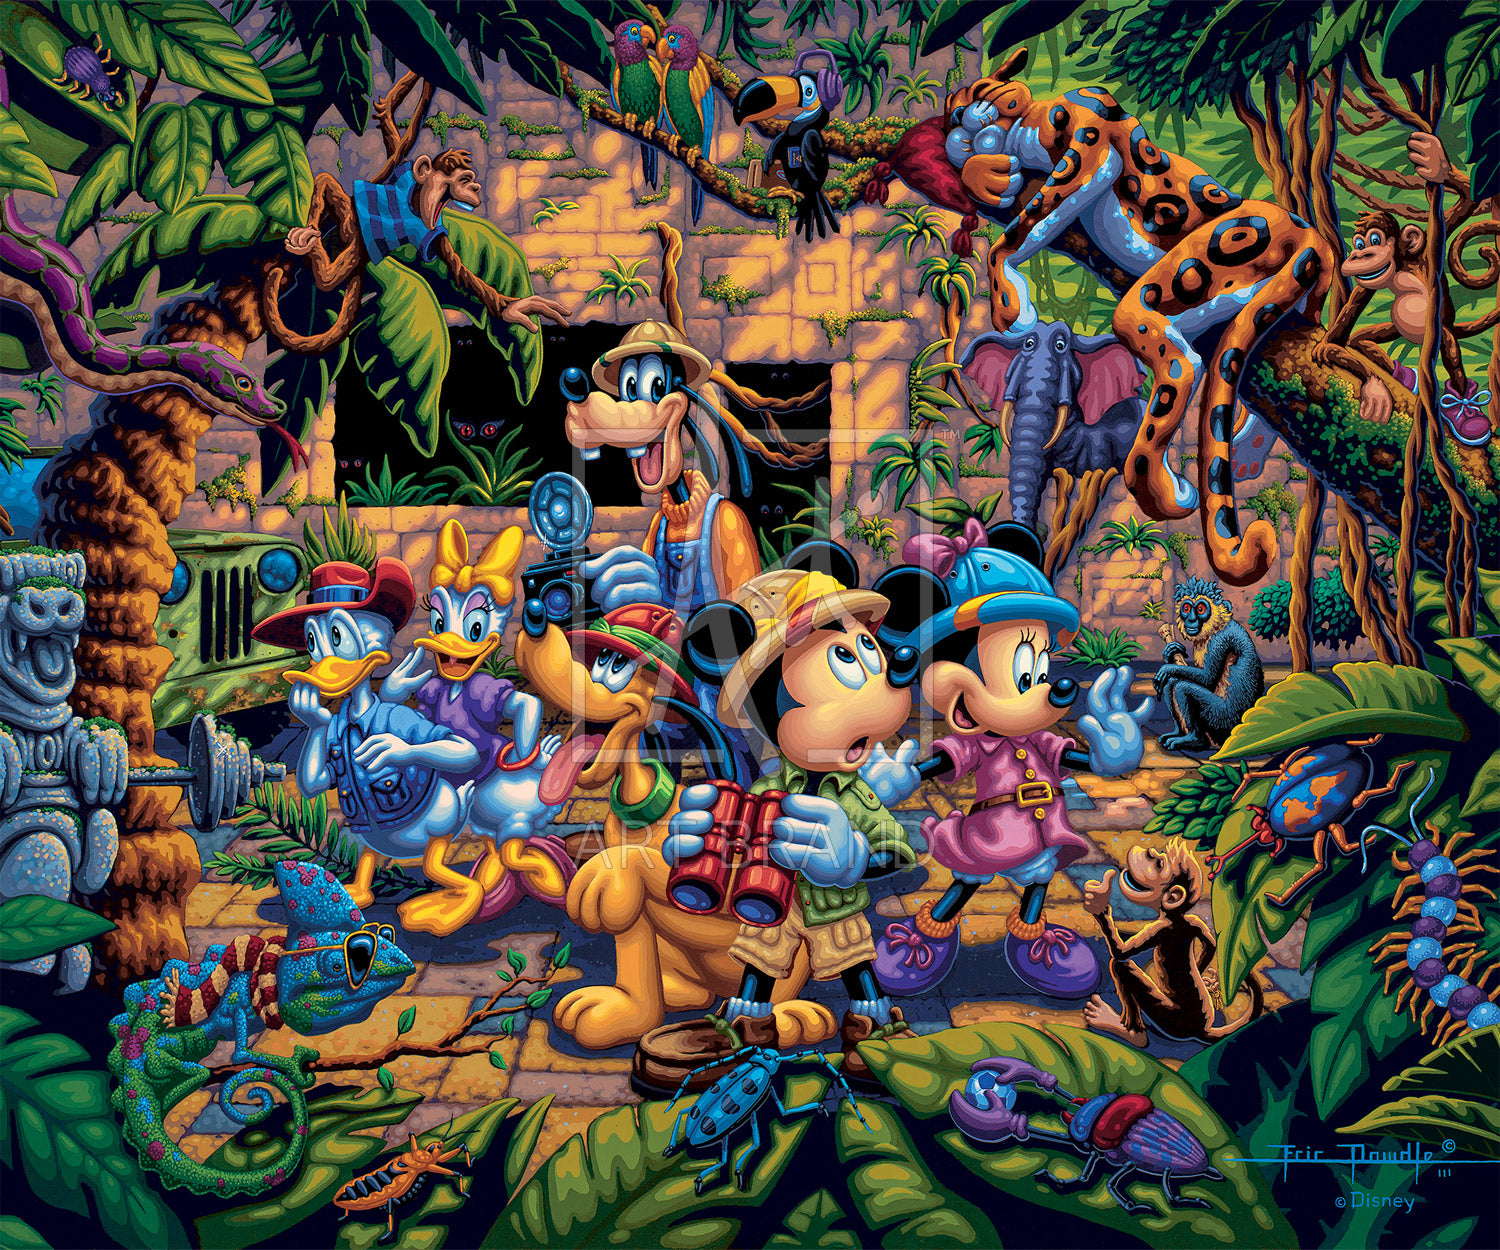 The lush jungle vegetation supports a variety of creatures great and small, including a chameleon, a variety of insects, a snake, birds, monkeys, and even a leopard and an elephant. Mickey and friends find themselves in the center of it all!